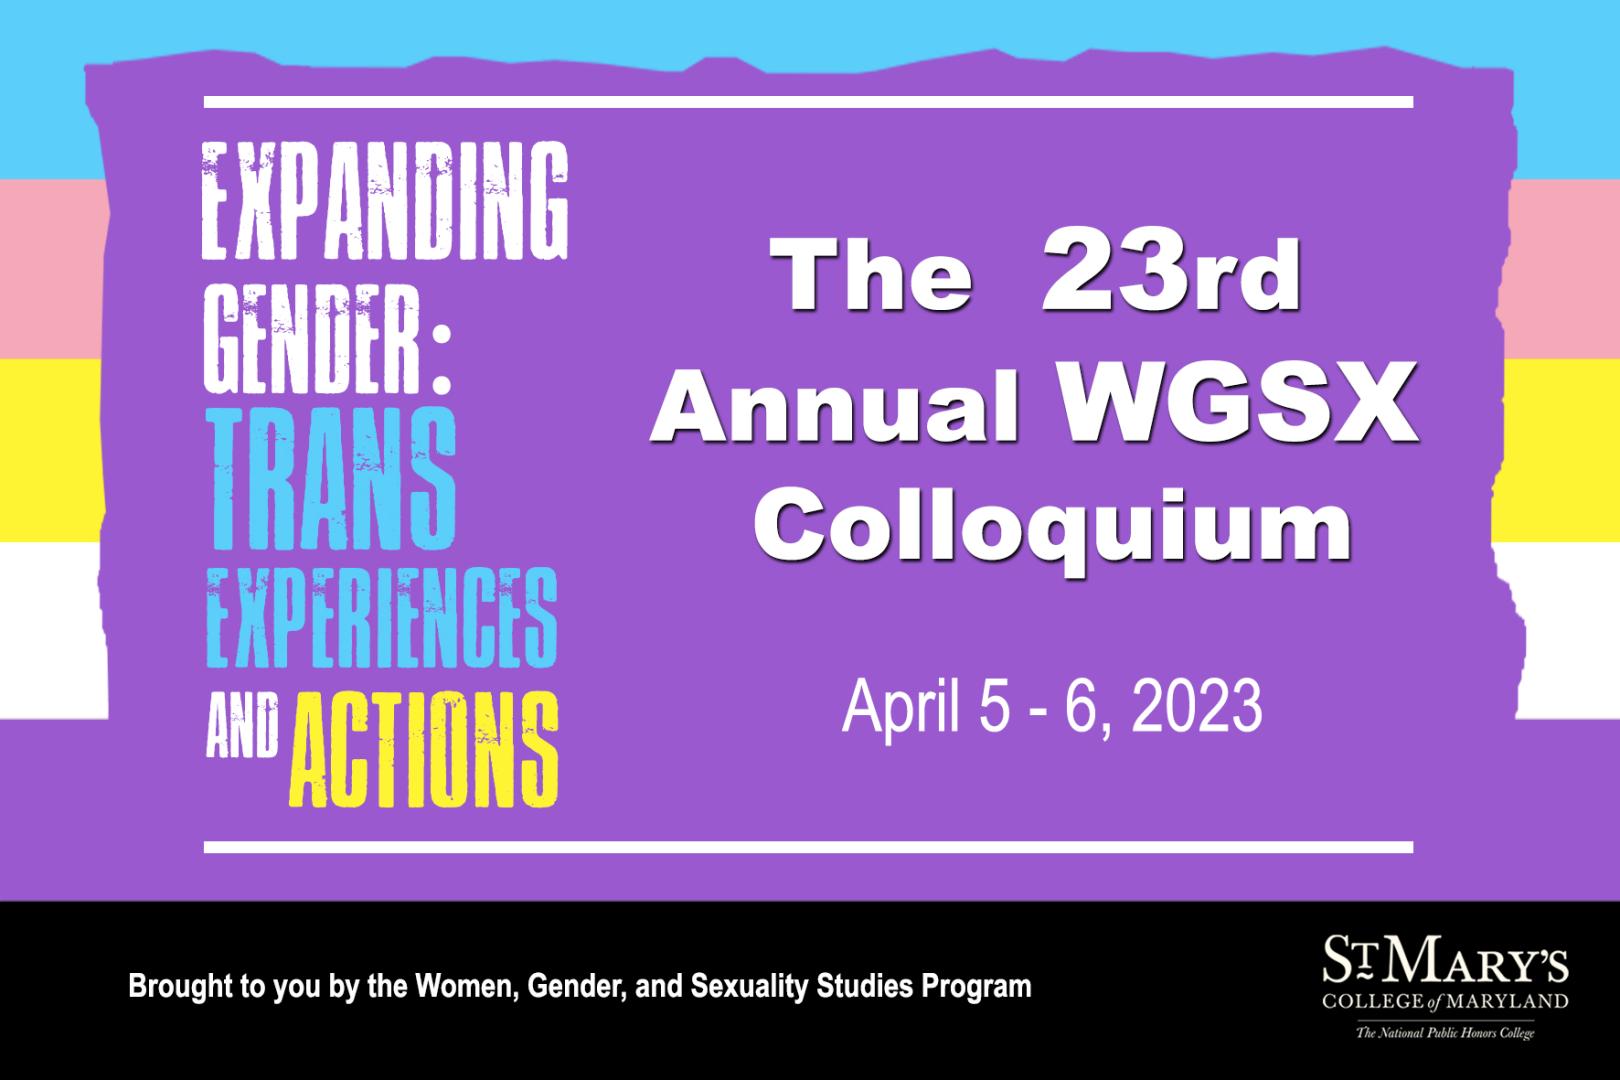 Expanding Gender: Trans Experiences and Actions, the 23rd Annual WGSX Colloquium April 5-6, 2023